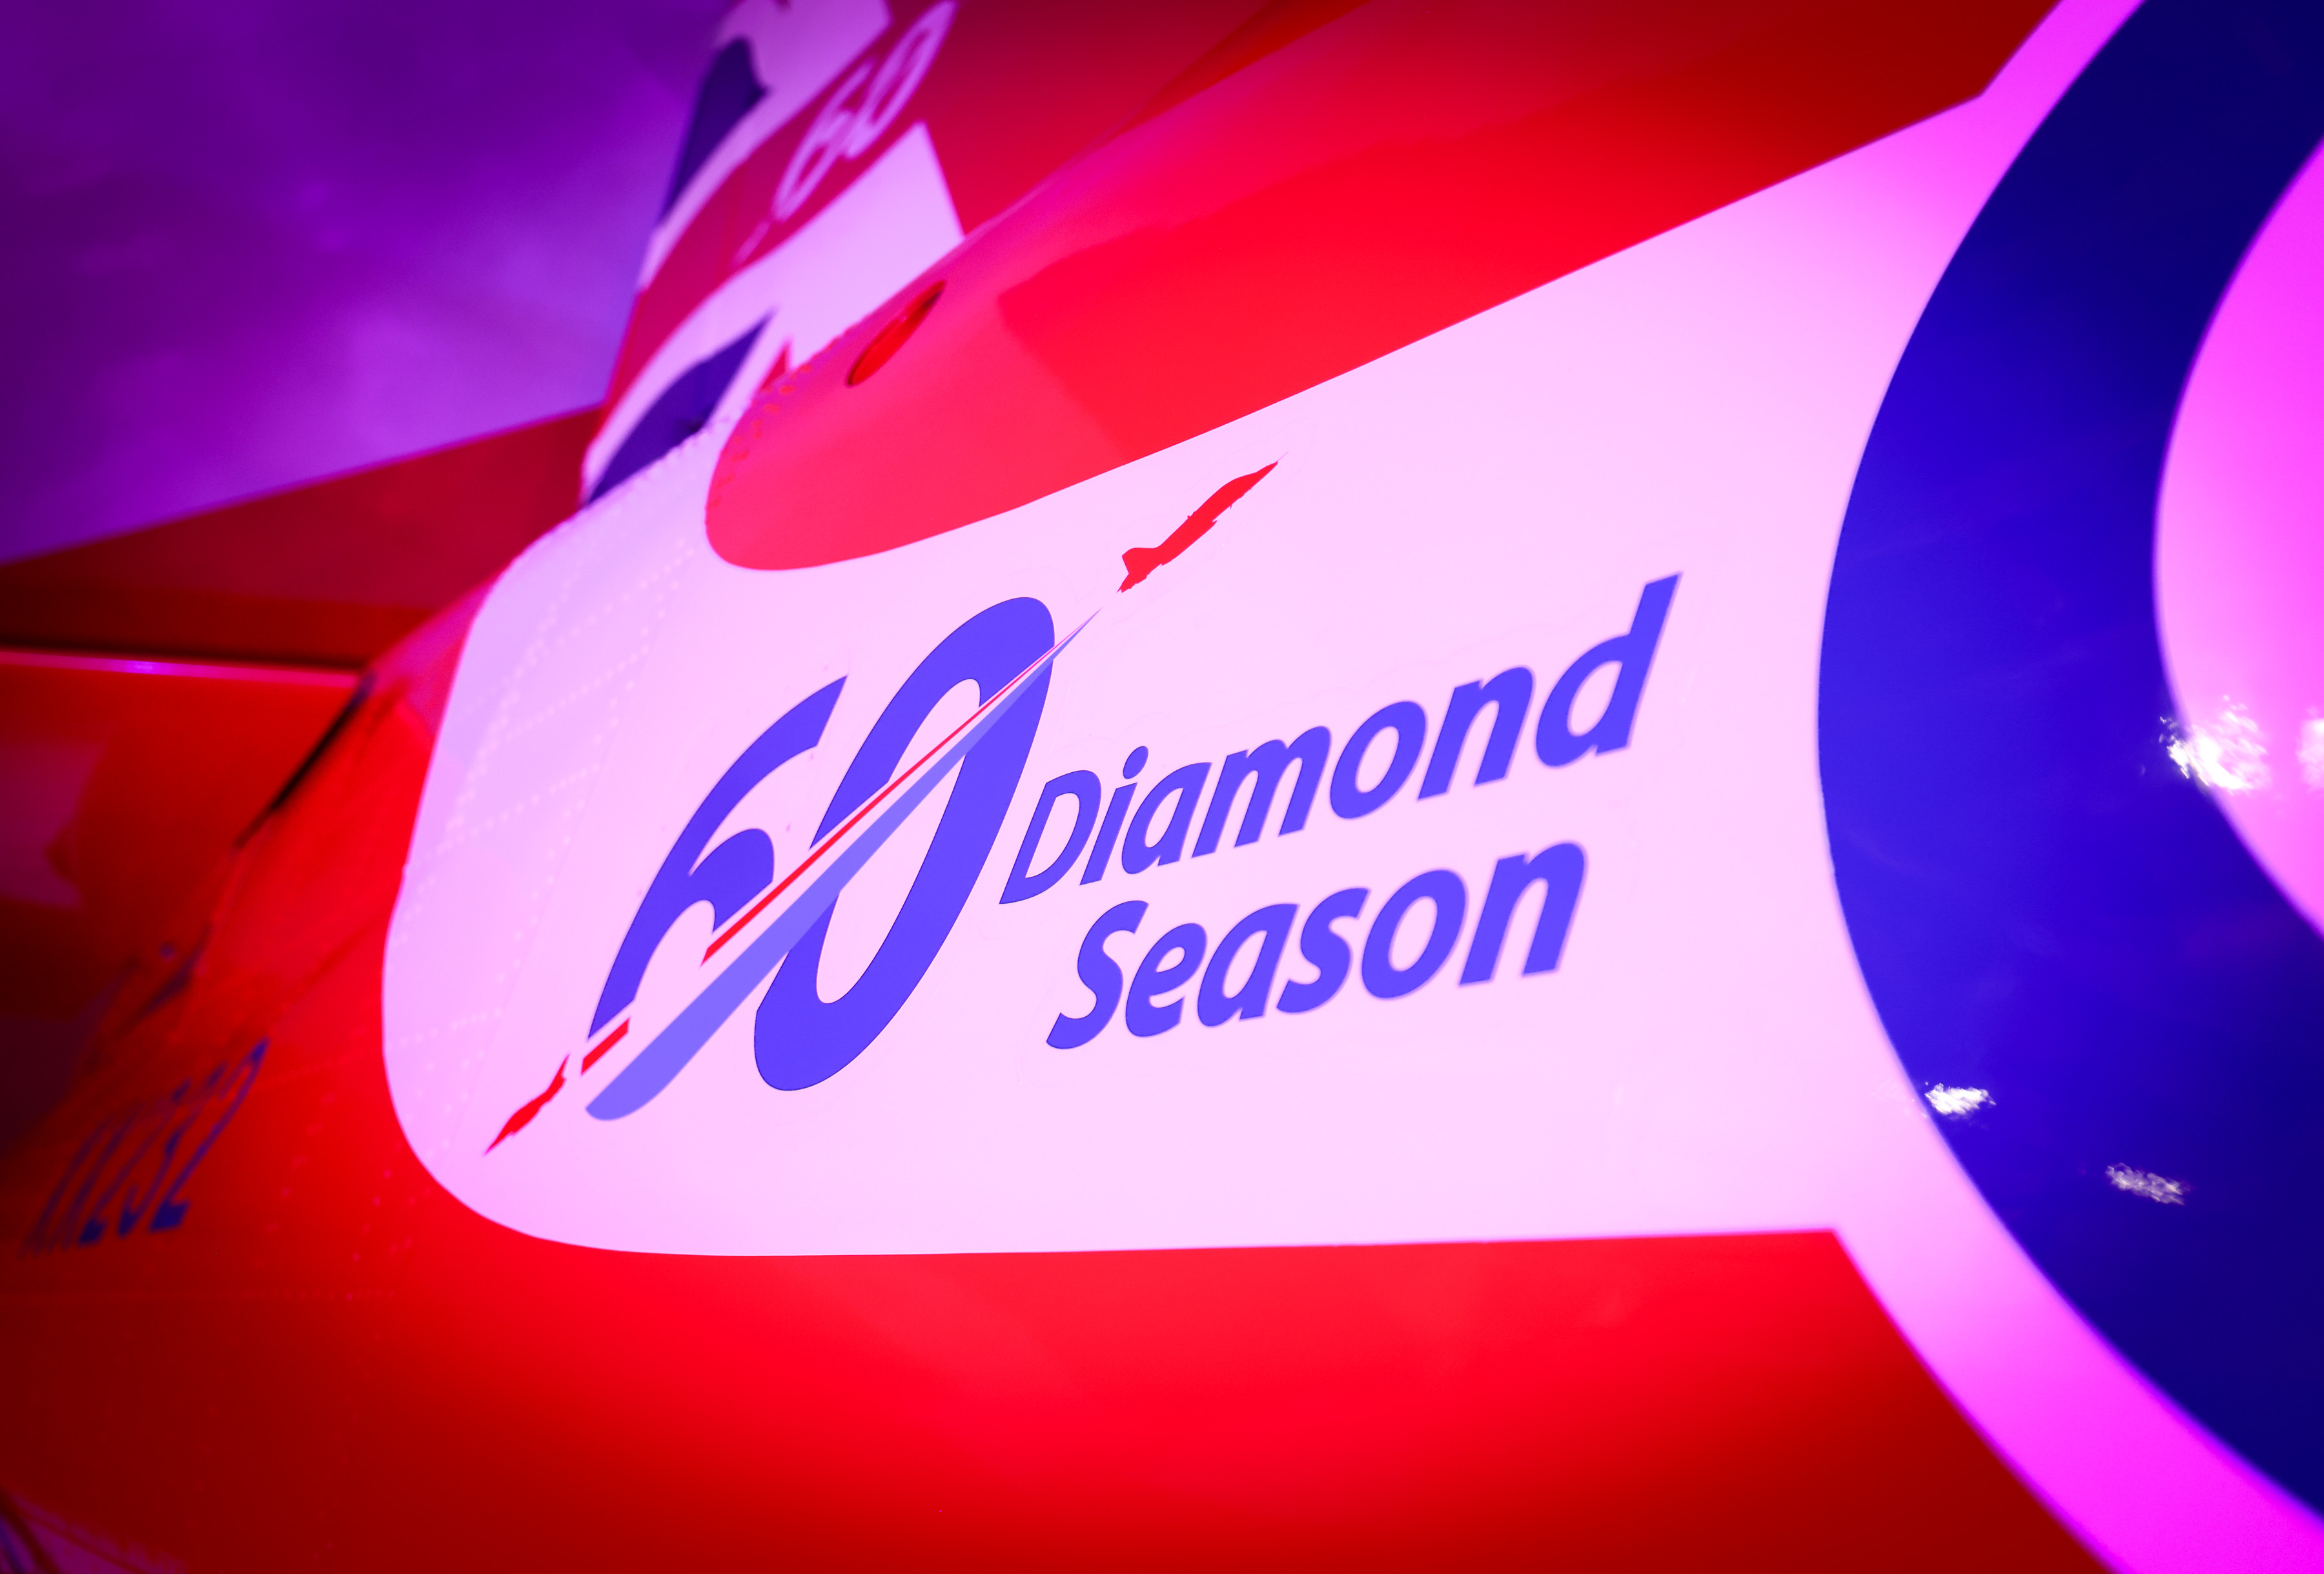 The 2024 campaign is the Red Arrows' Diamond Season.